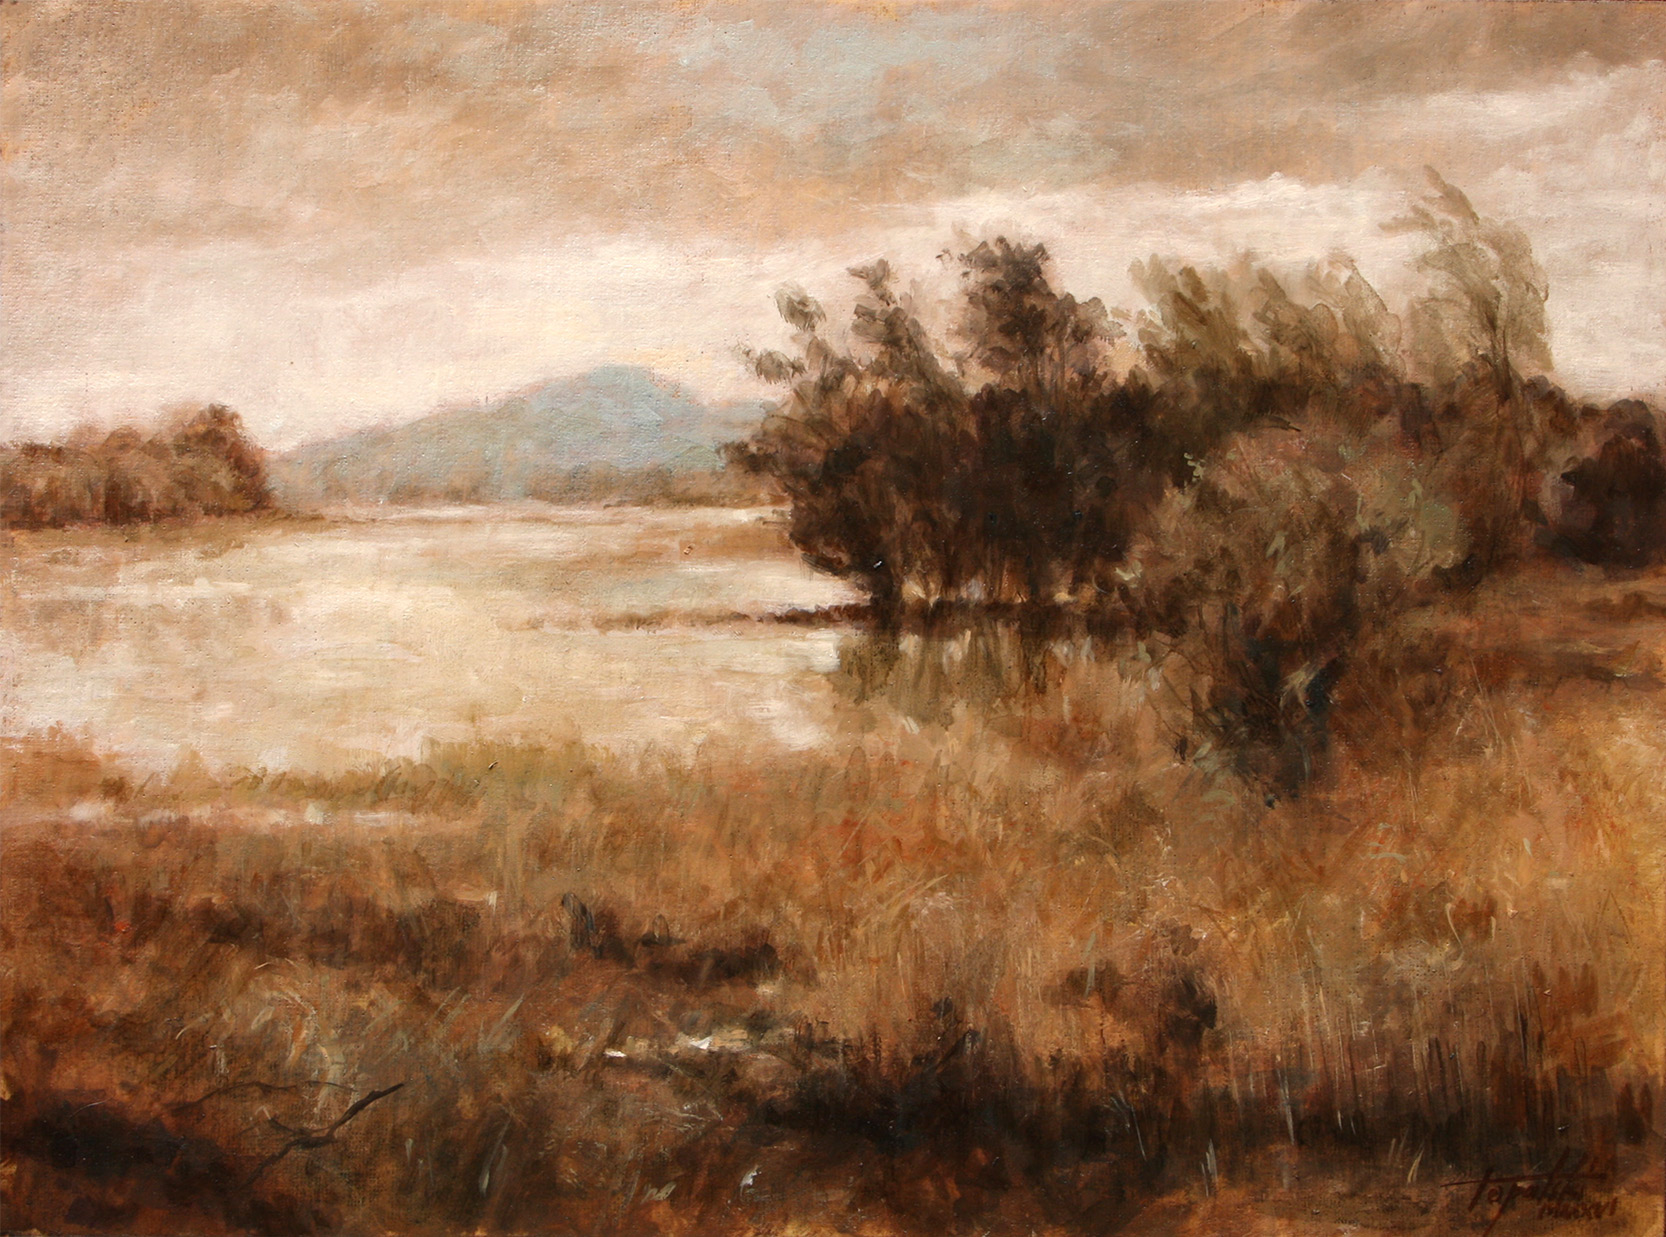 Distant Mountains – Landscape oil painting | Fine Arts Gallery ...